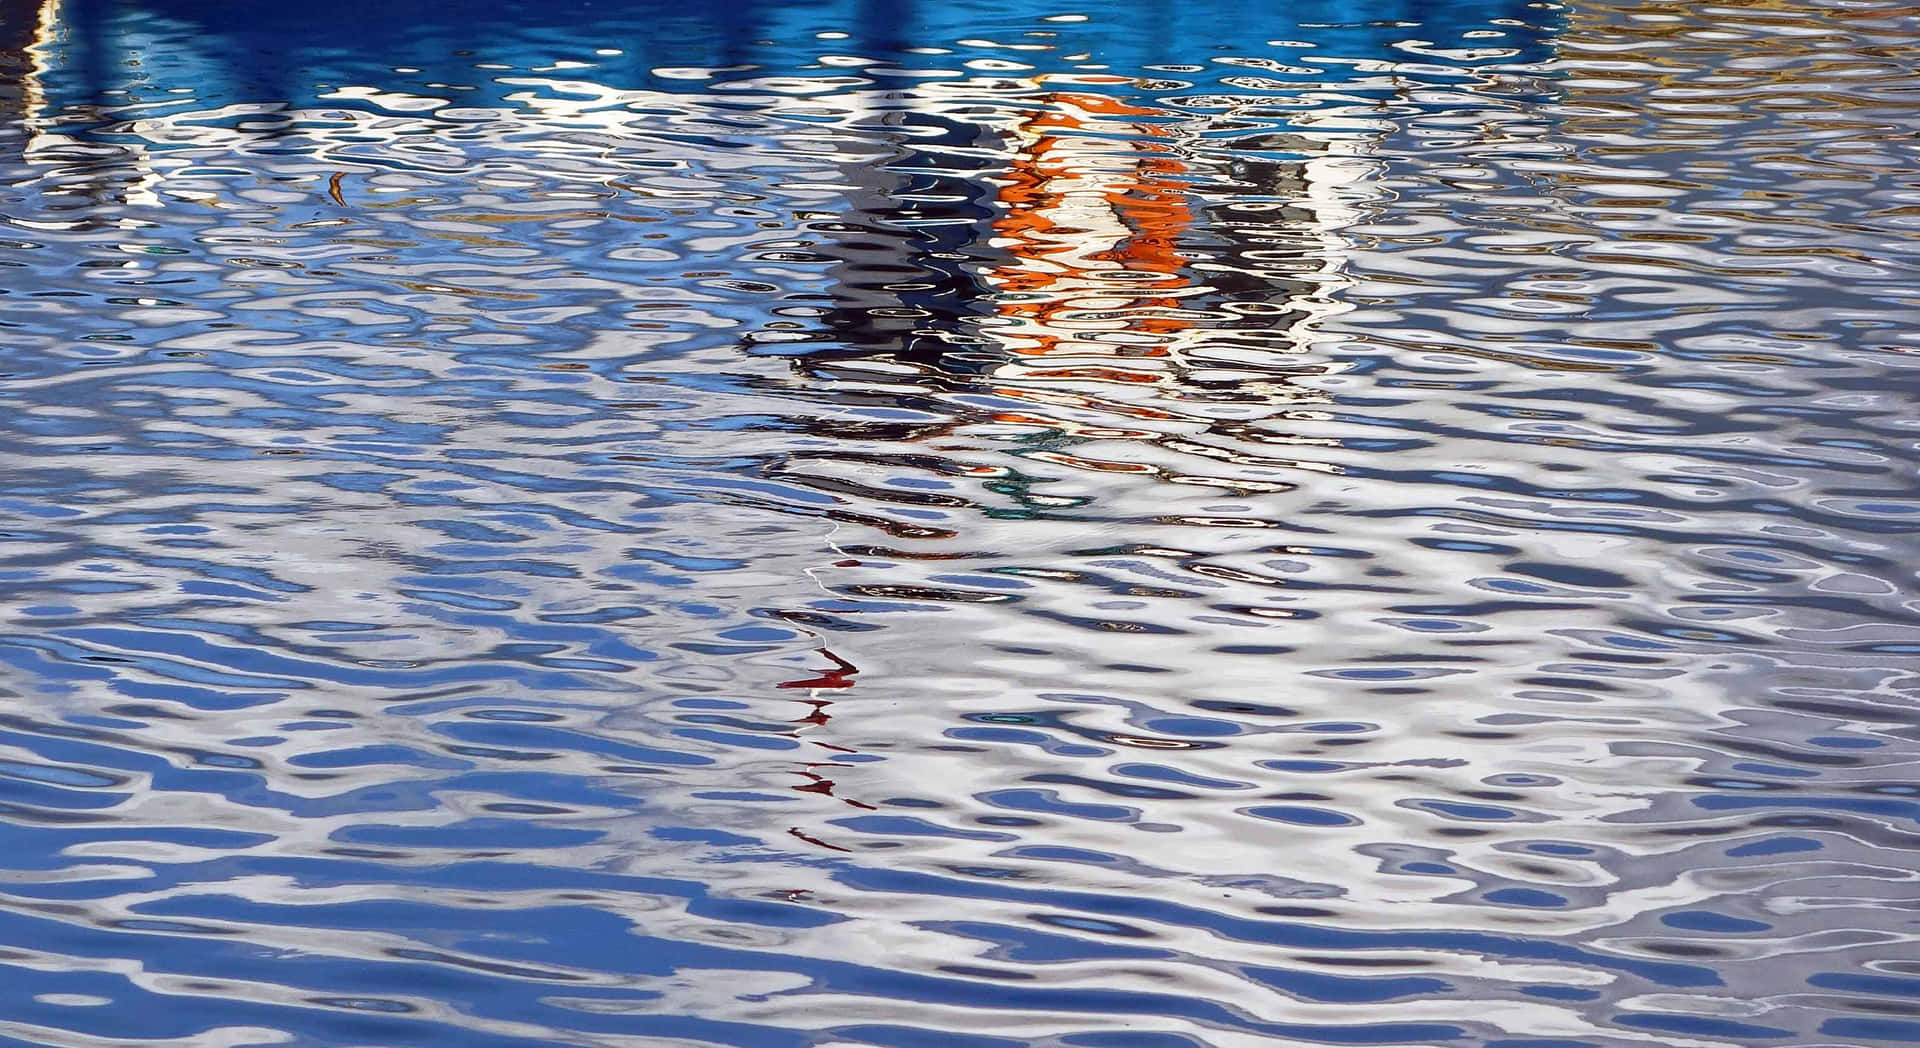 Boat Reflection In Water Picture